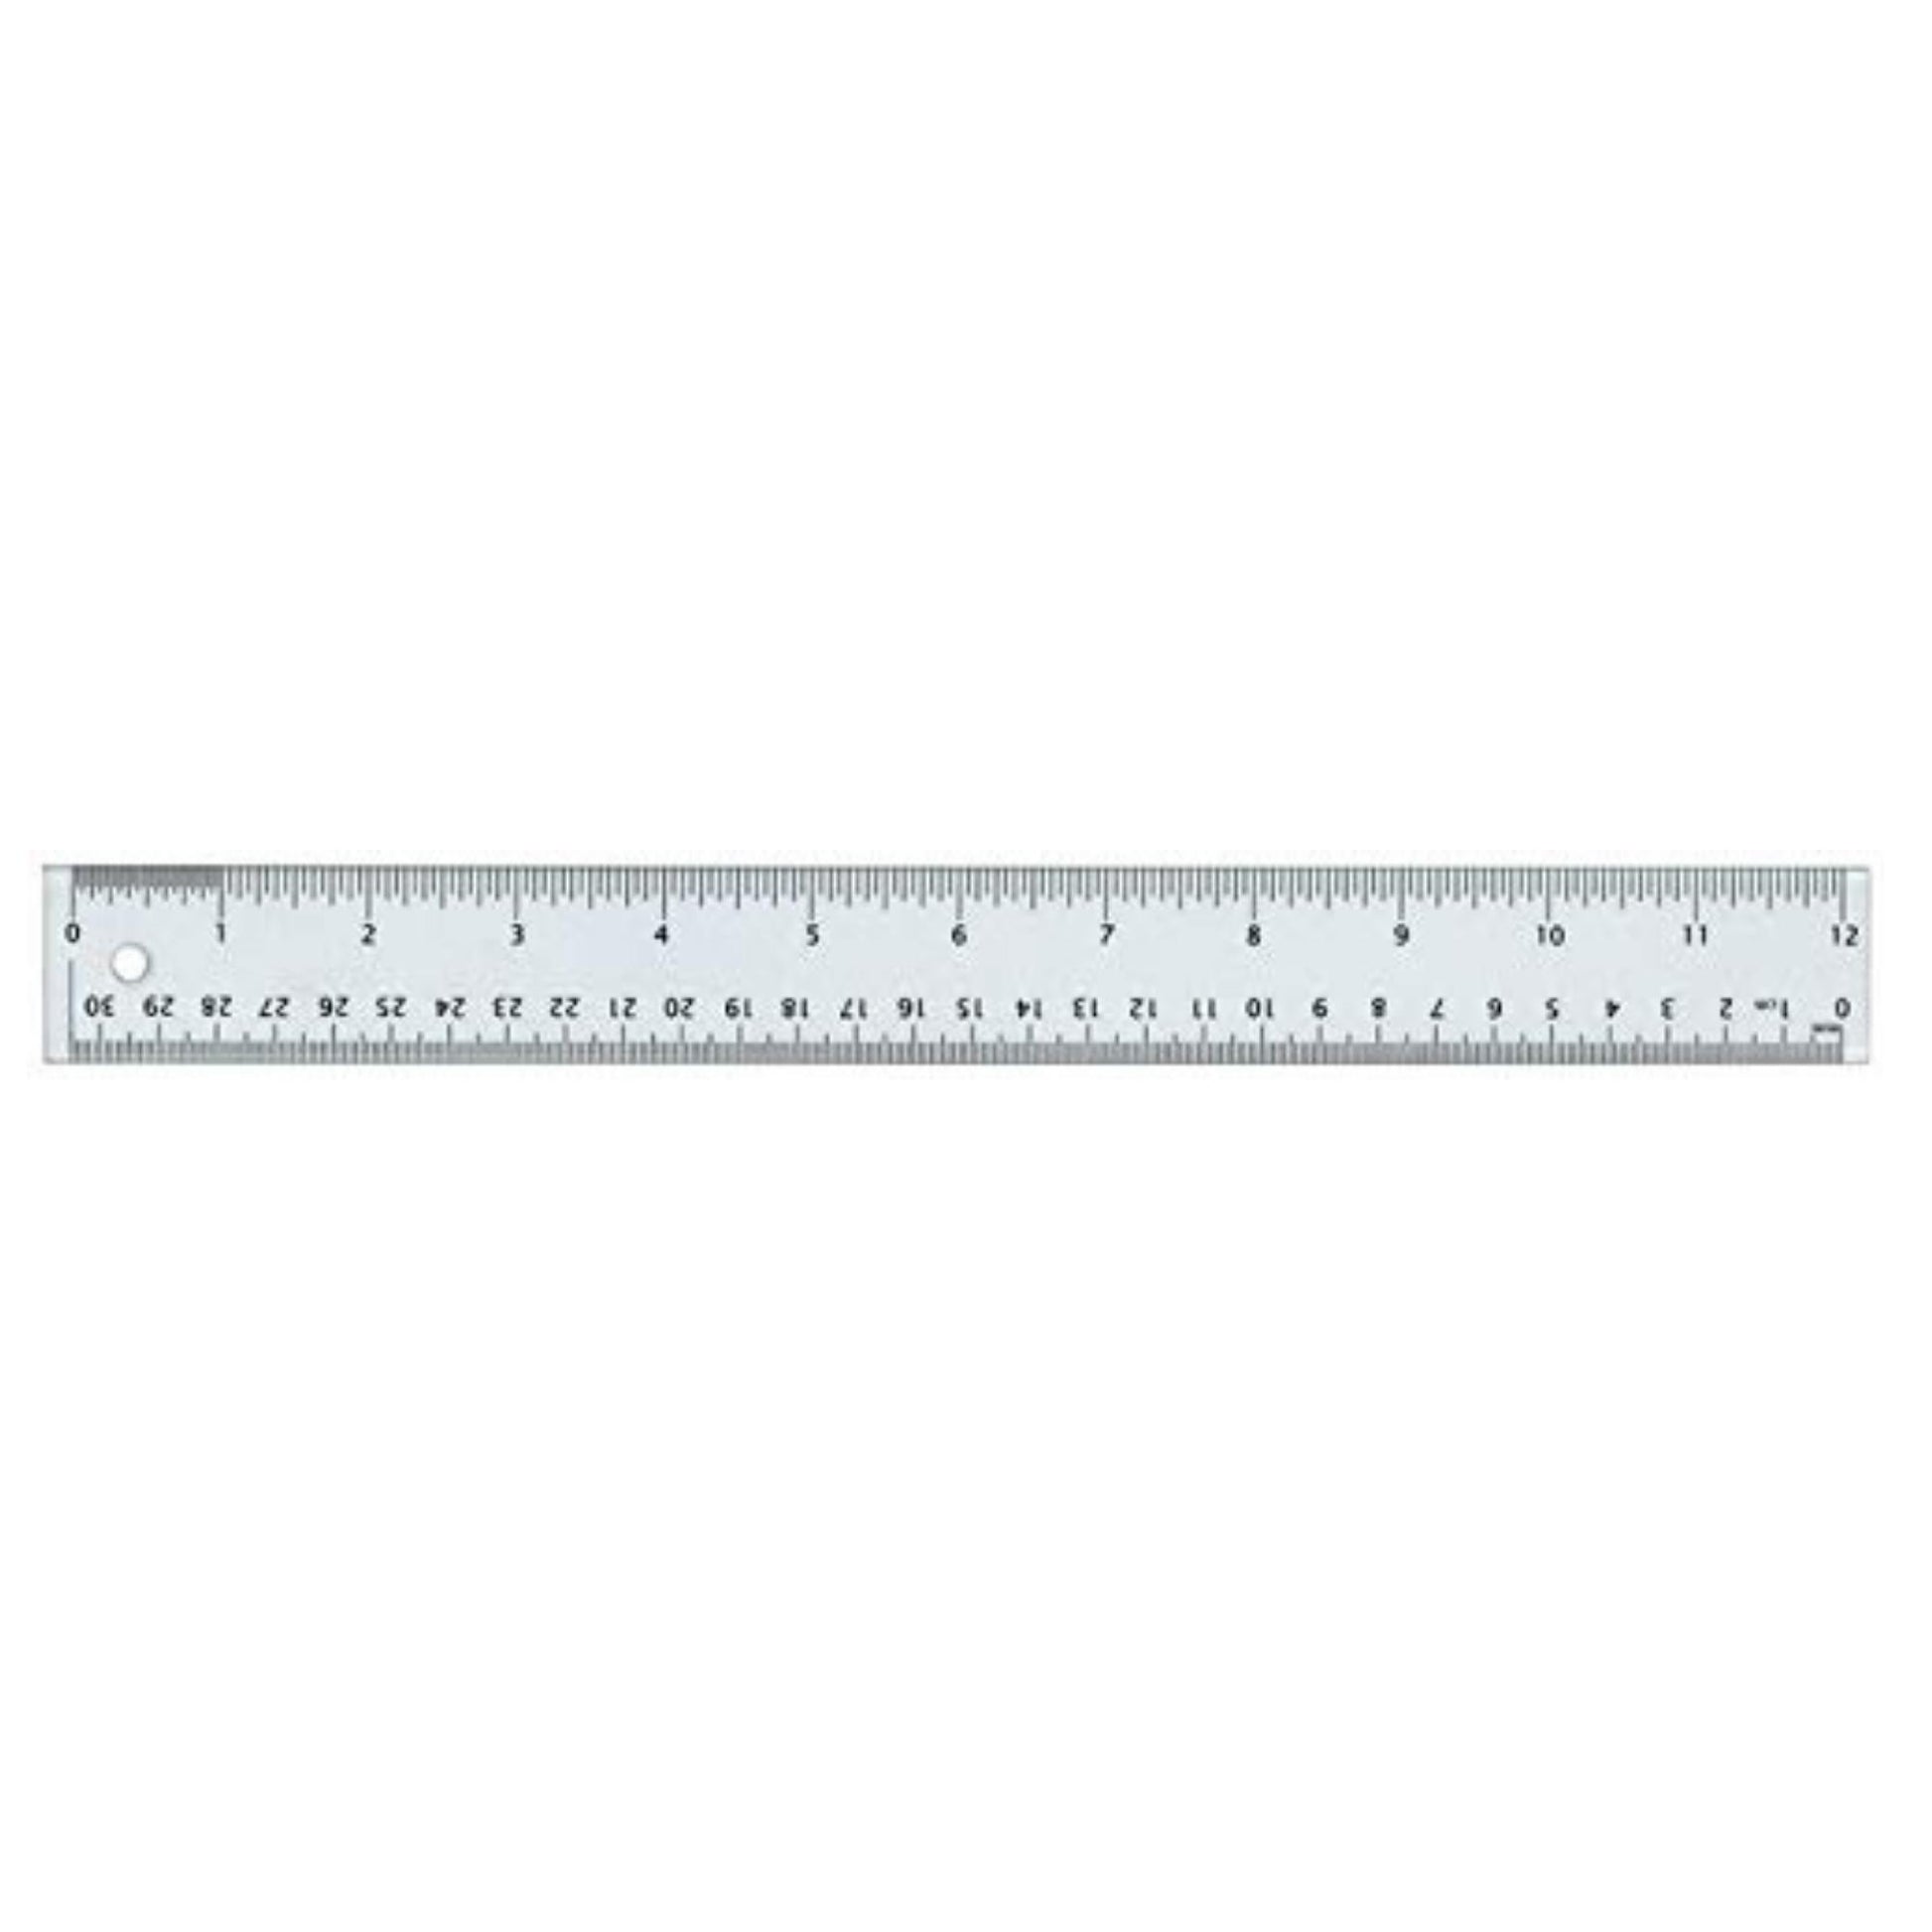 Newcomer Supply Opaque Metric Ruler, 15cm, 10/pack. Flexible plastic 